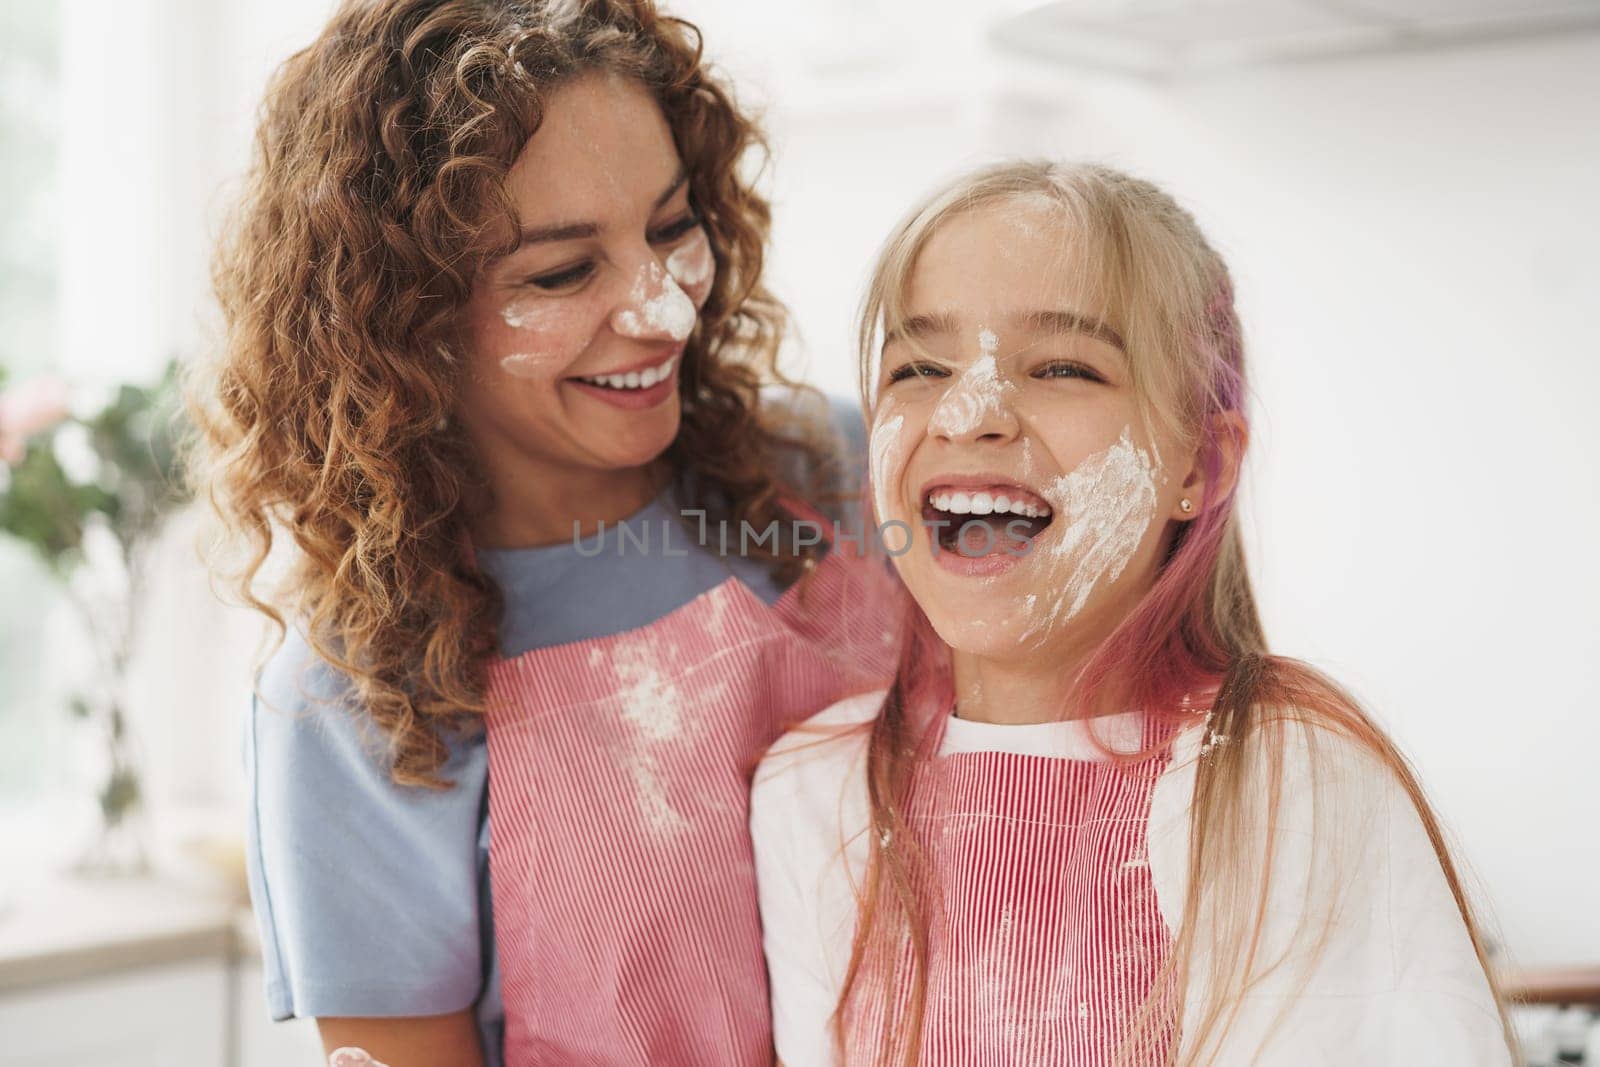 Mother and daughter having fun while cooking dough in kitchen by Fabrikasimf